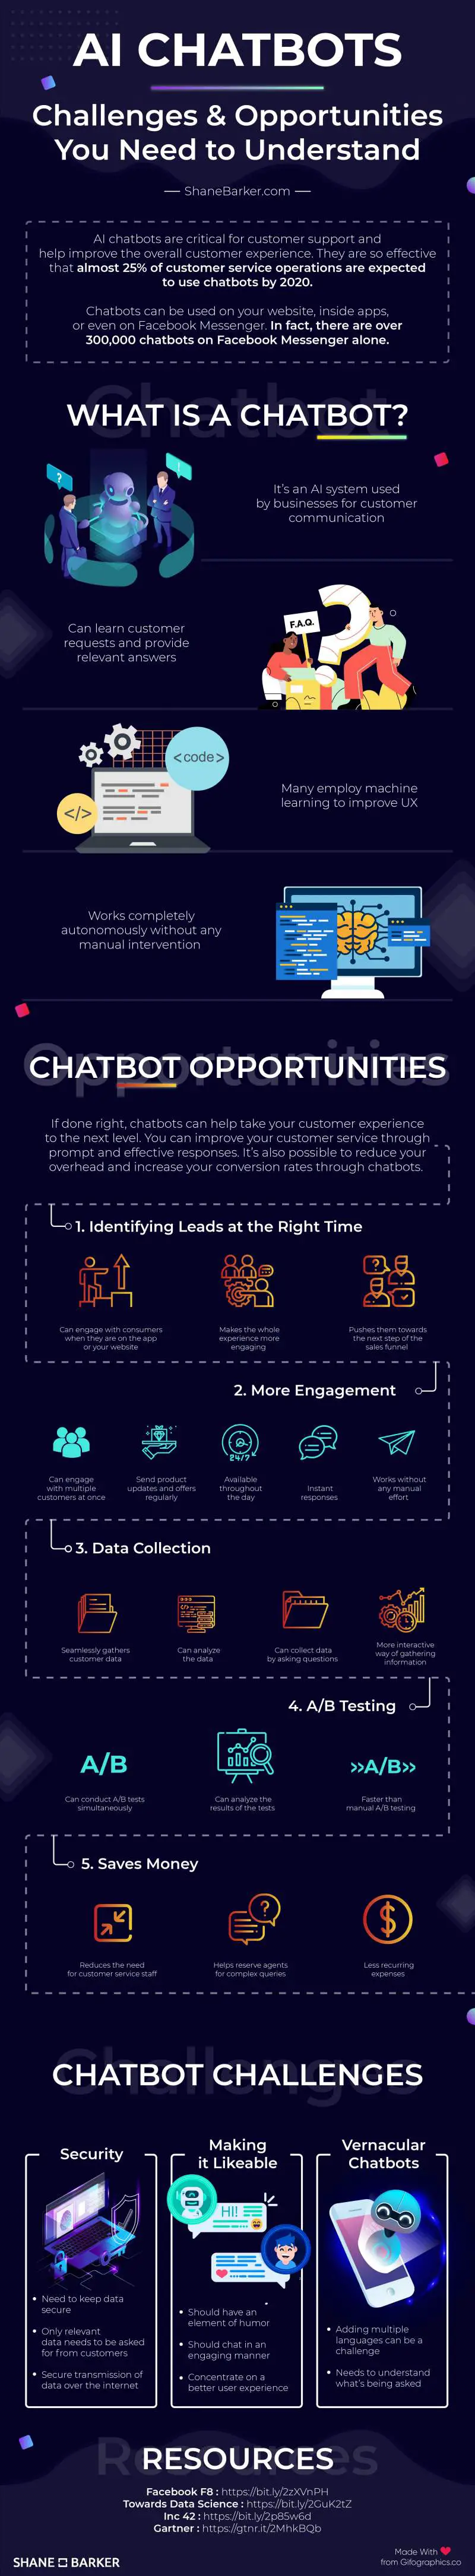 ai-chatbots-challenges-and-opportunities-you-need-to-understand.jpg